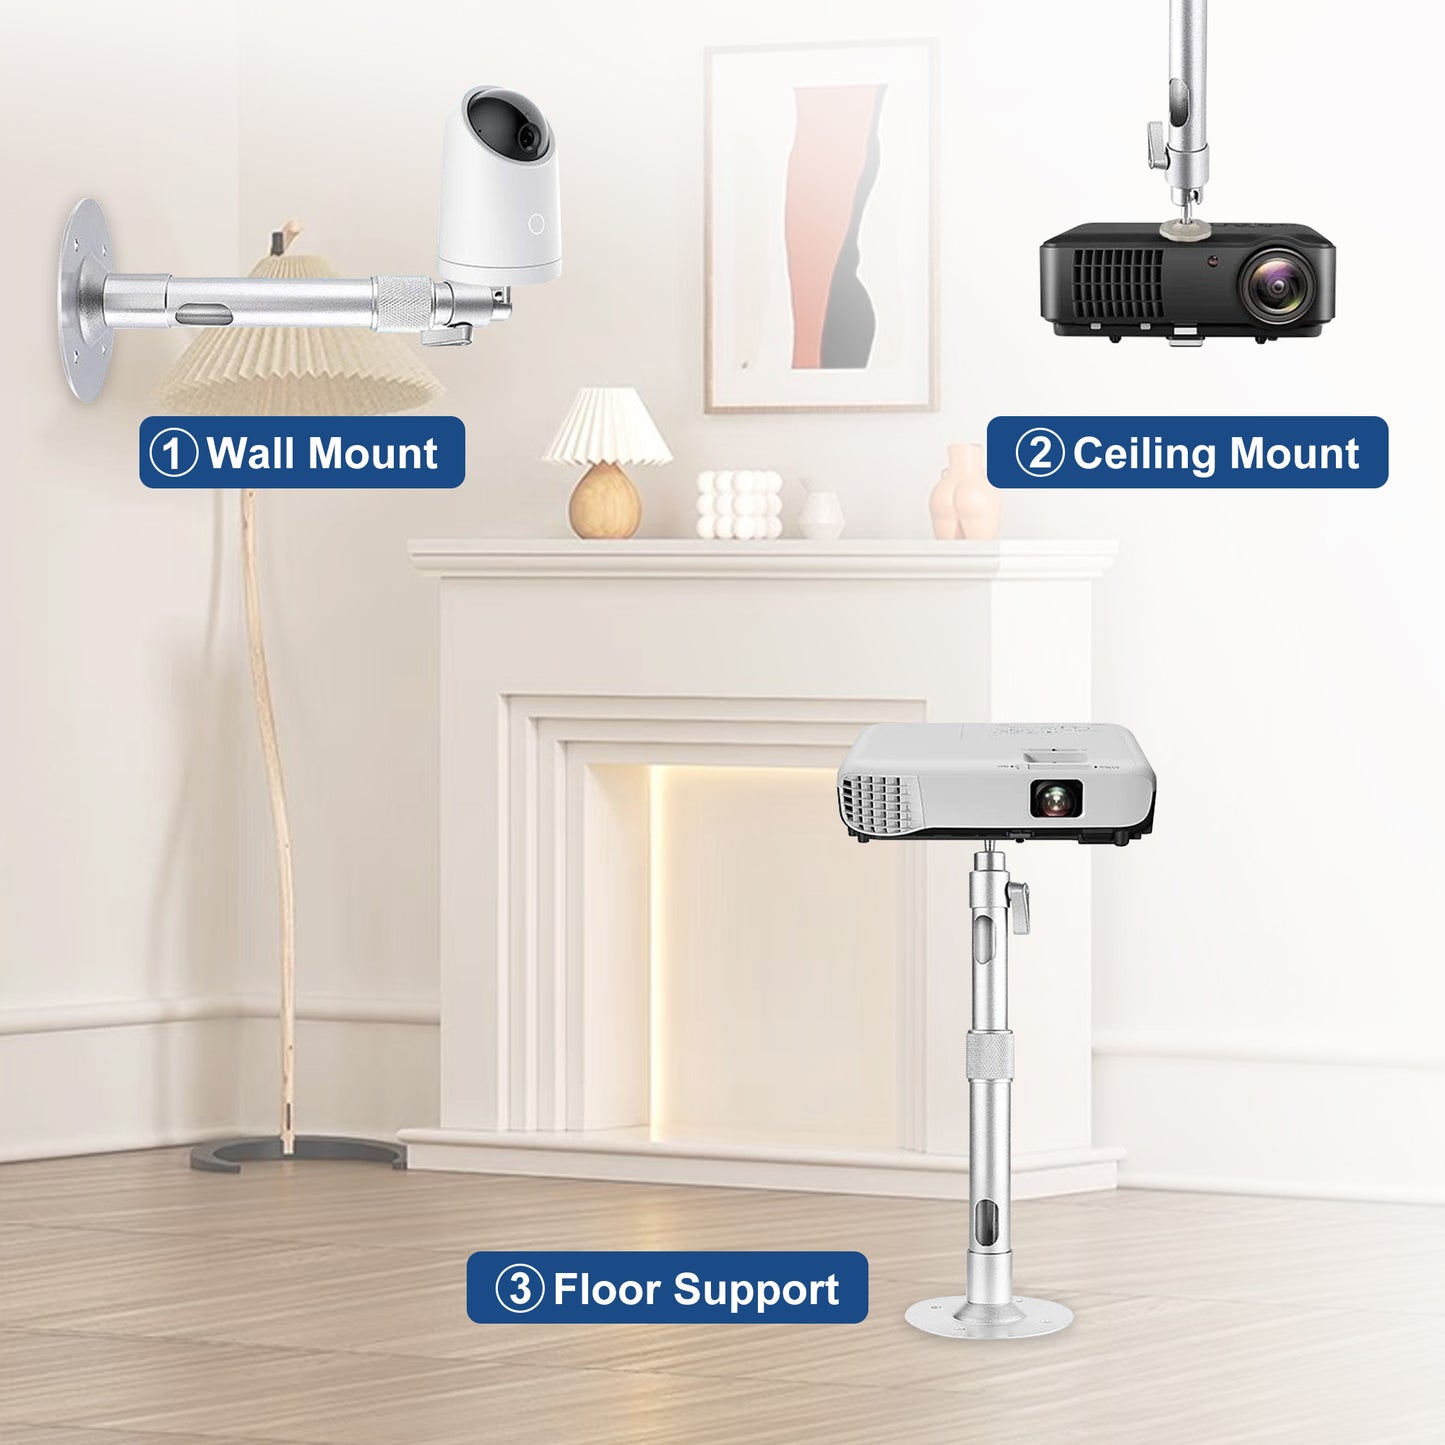 360° Rotatable Universal Extendable Projector Mount - Height Adjustable 10.83" to 19.69", Load Capacity 11 lbs,Ideal for Wall or Ceiling Installation